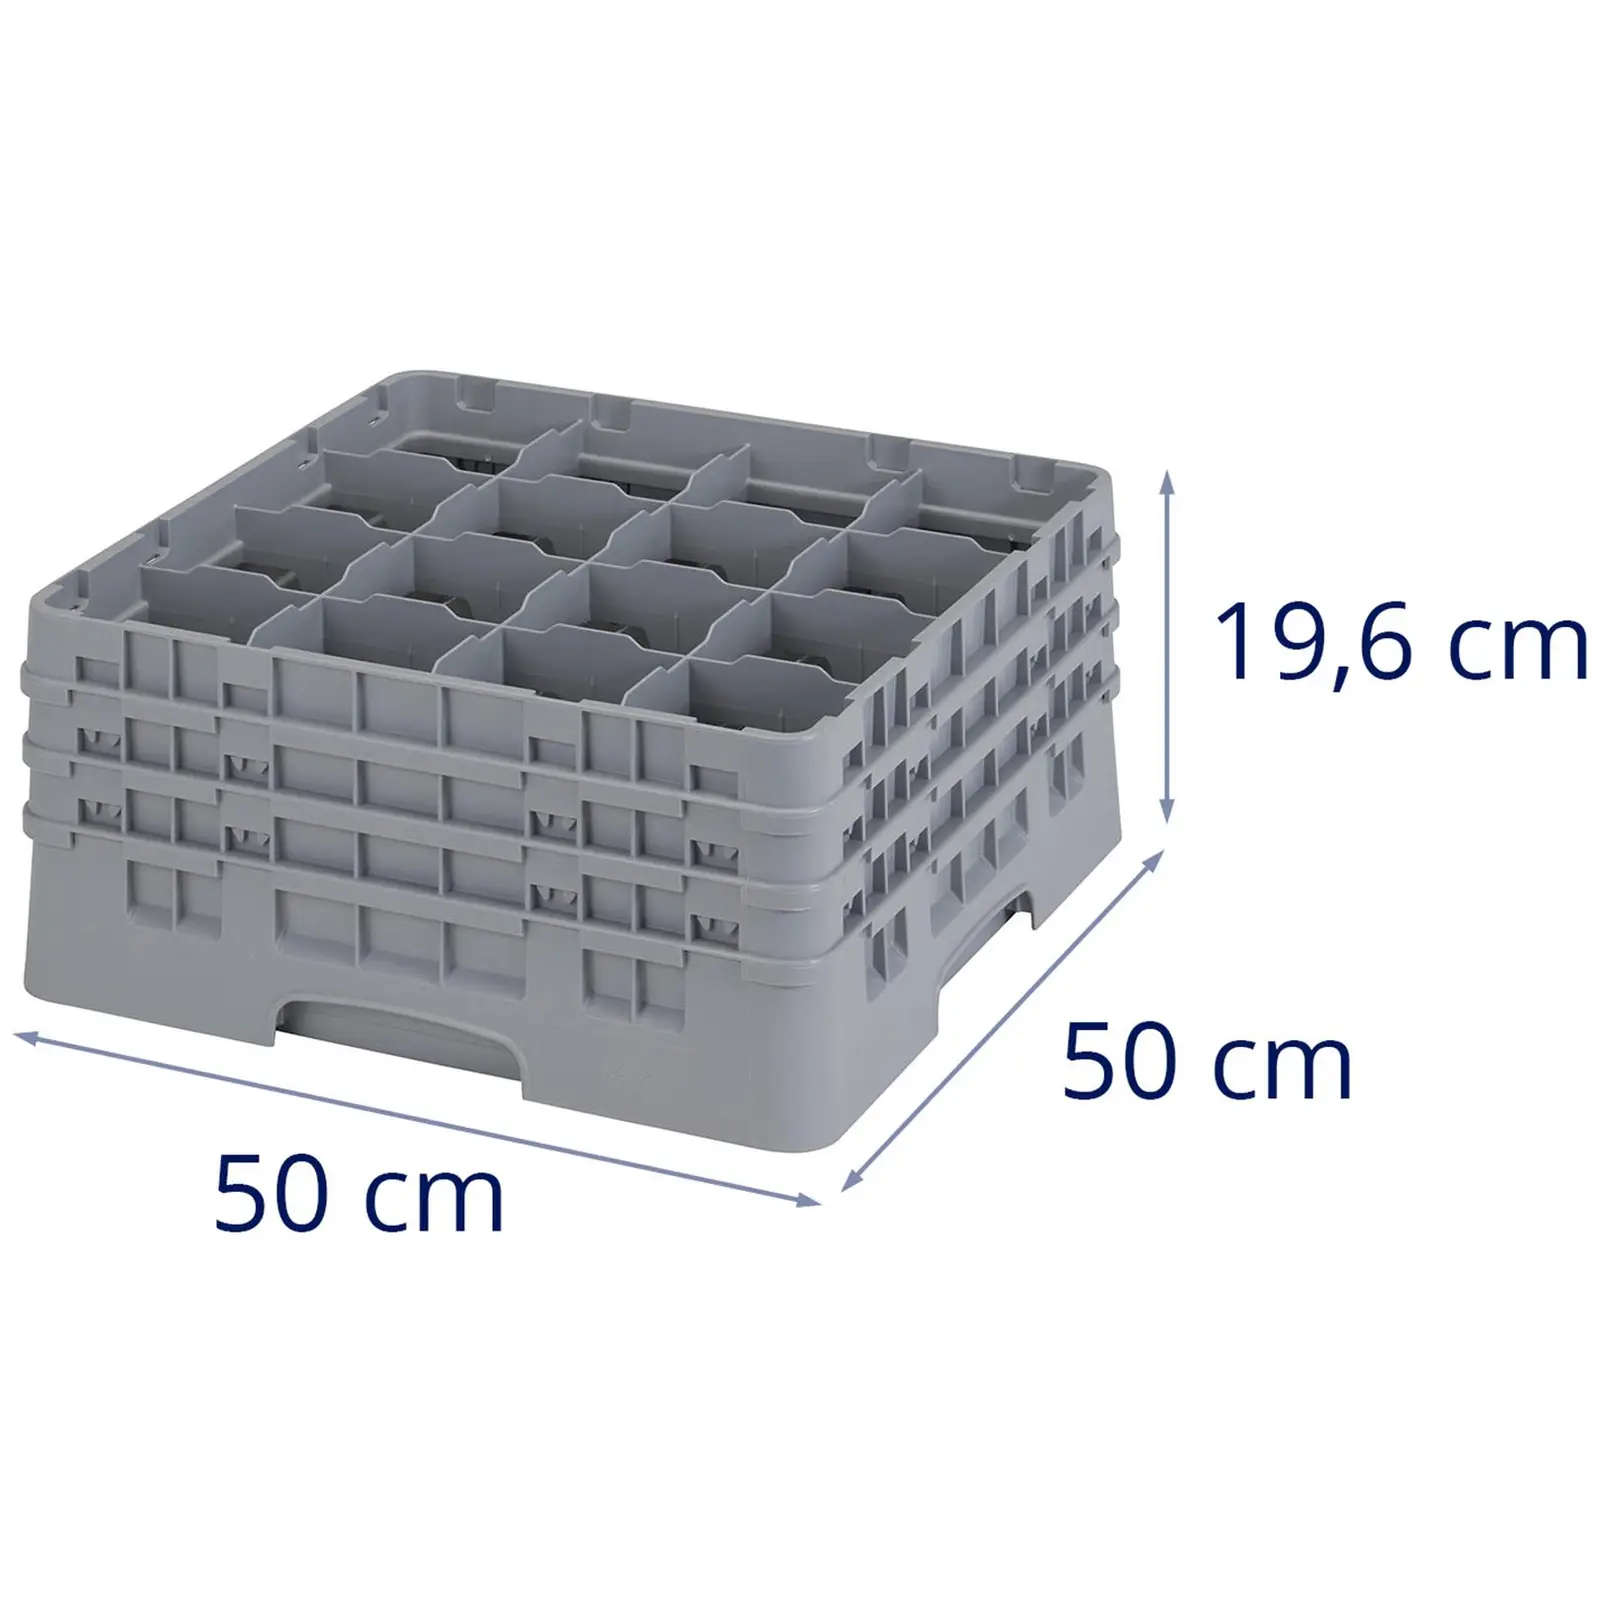 Glass Rack - 16 compartments - 50 x 50 x 22,5 cm - glass height: 19,6 cm